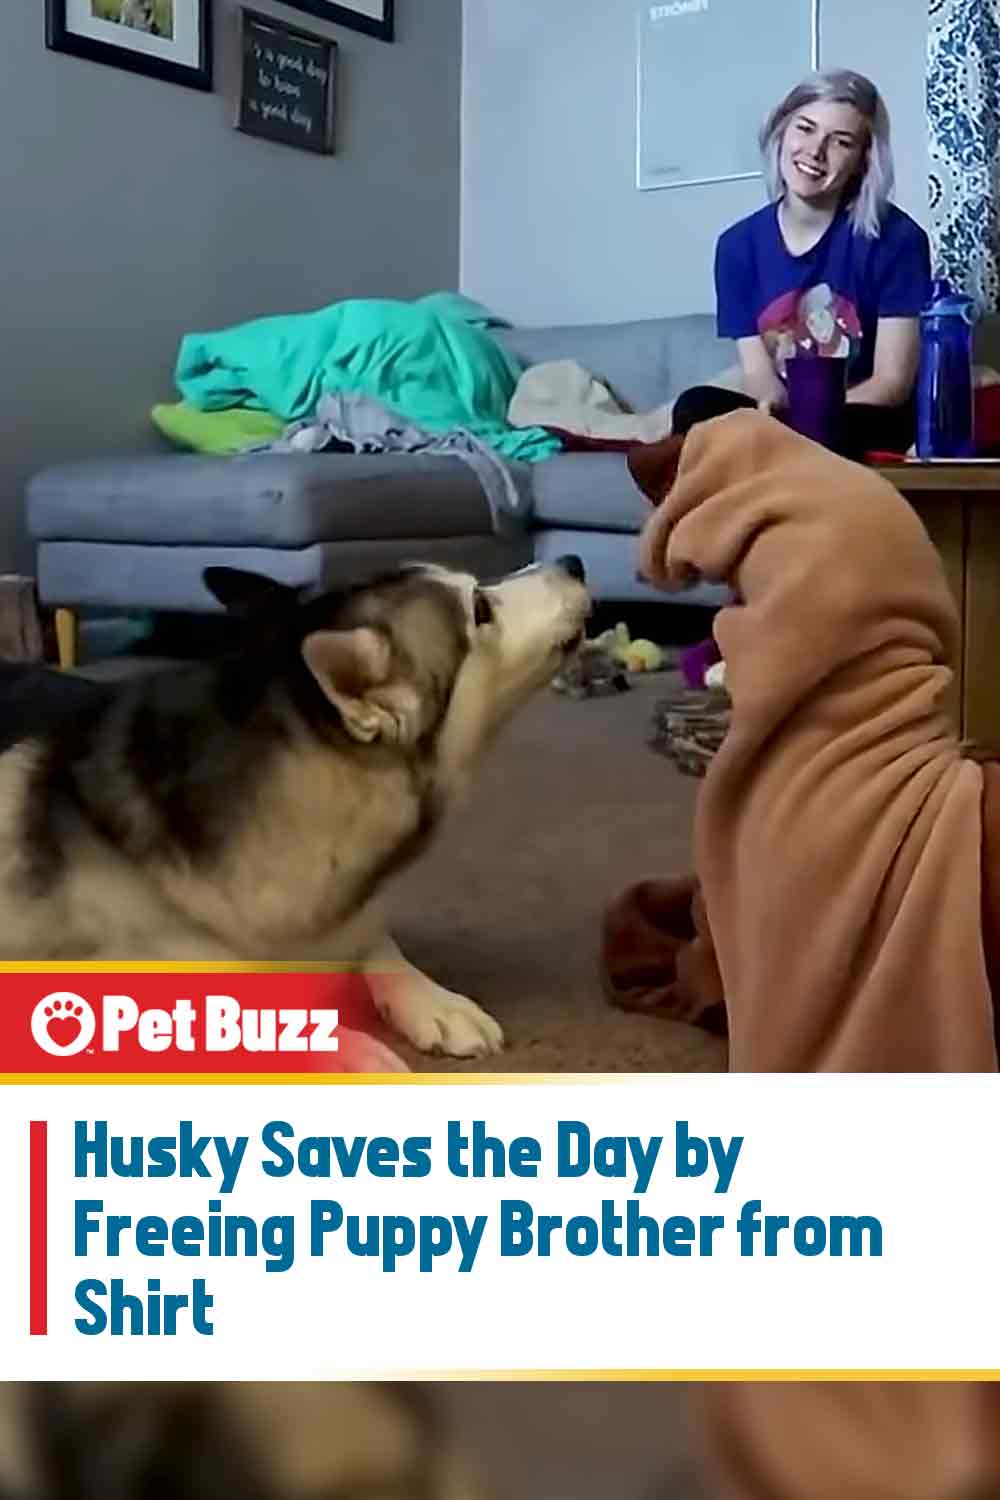 Husky Saves the Day by Freeing Puppy Brother from Shirt